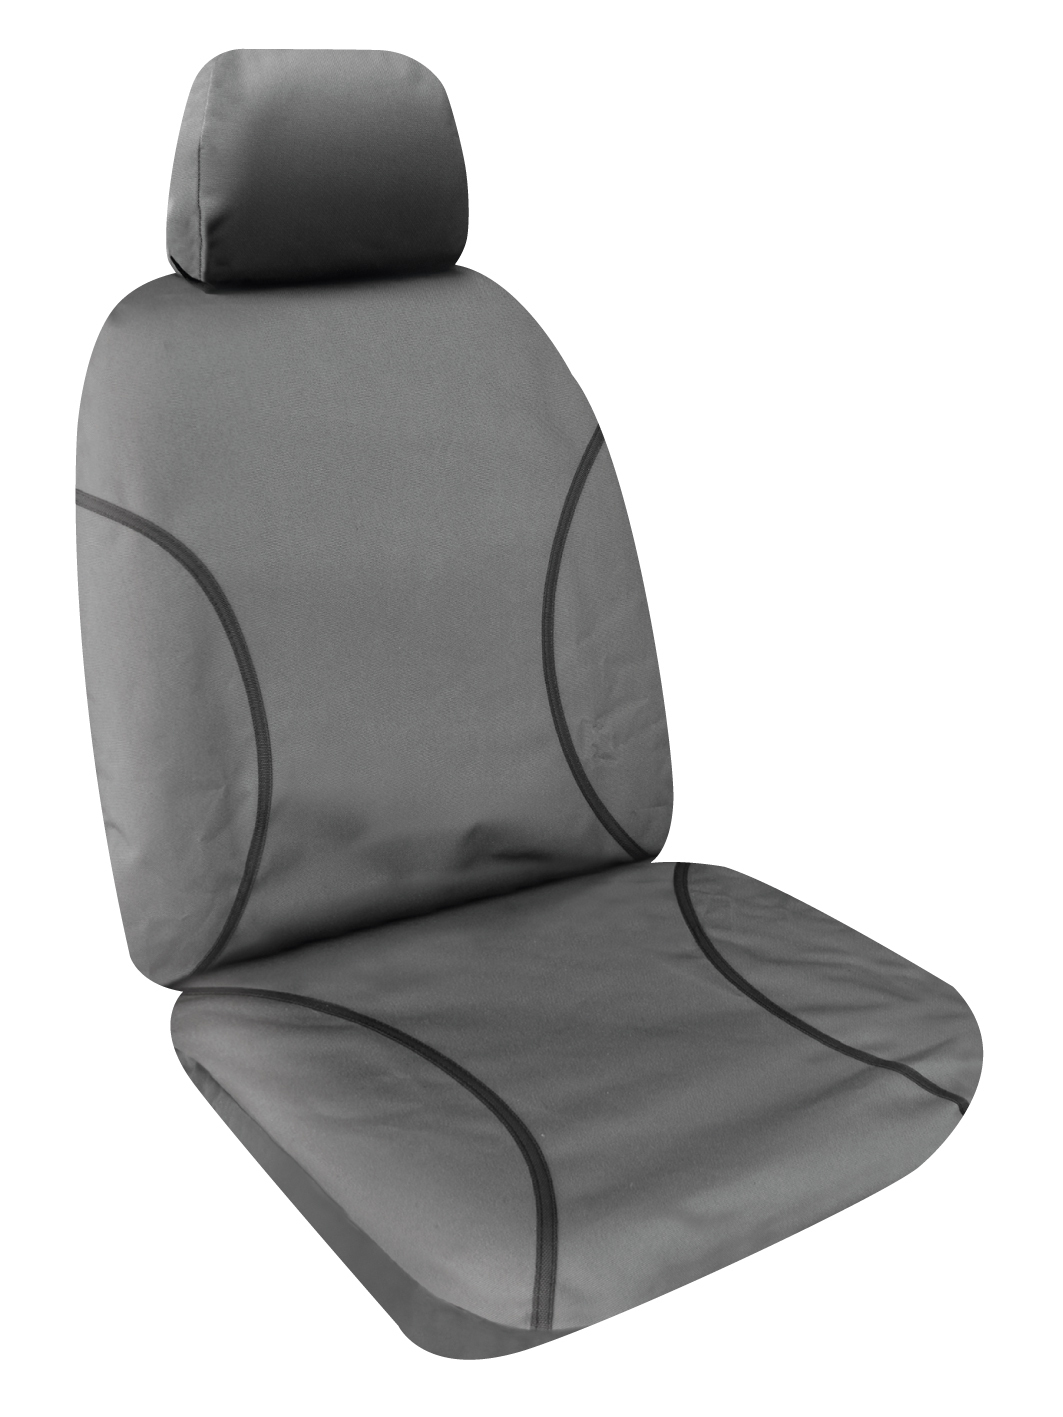 Sperling Seat Cover REAR TRG (TRADIES CANVAS GREY) To Suit Mitsubishi Triton (MN) Dual Cab 2012-2015